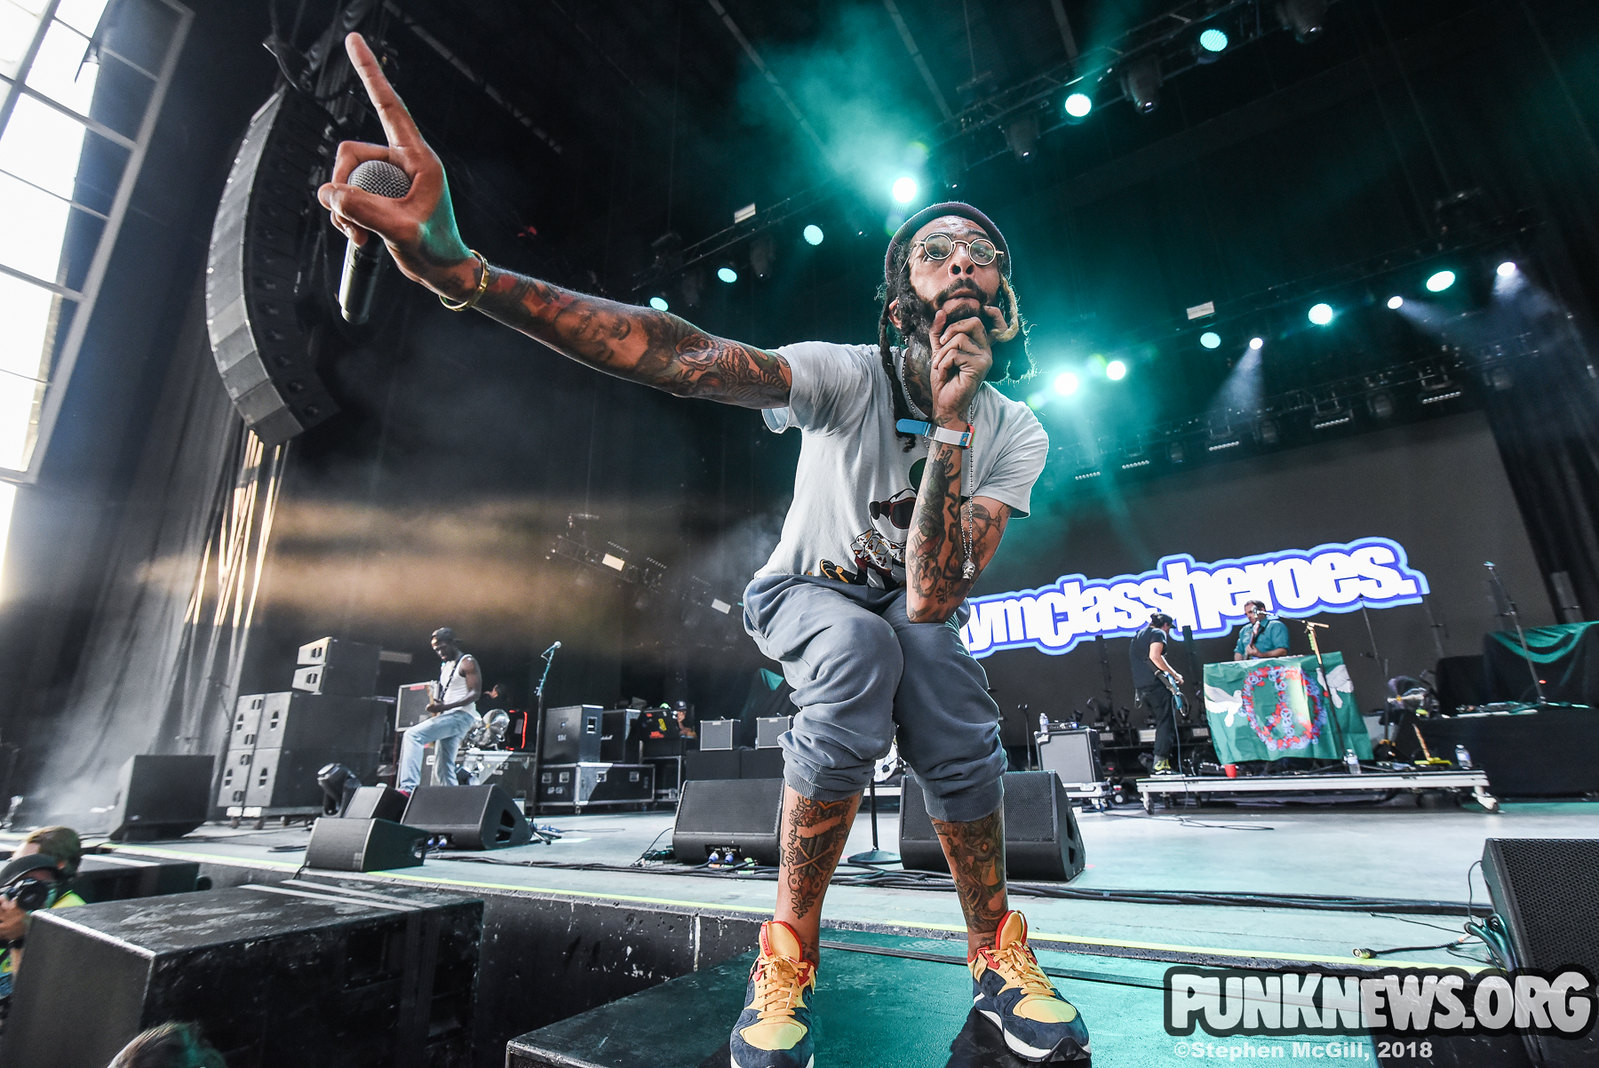 Gym Class Heroes at Budweiser Stage, 08/28